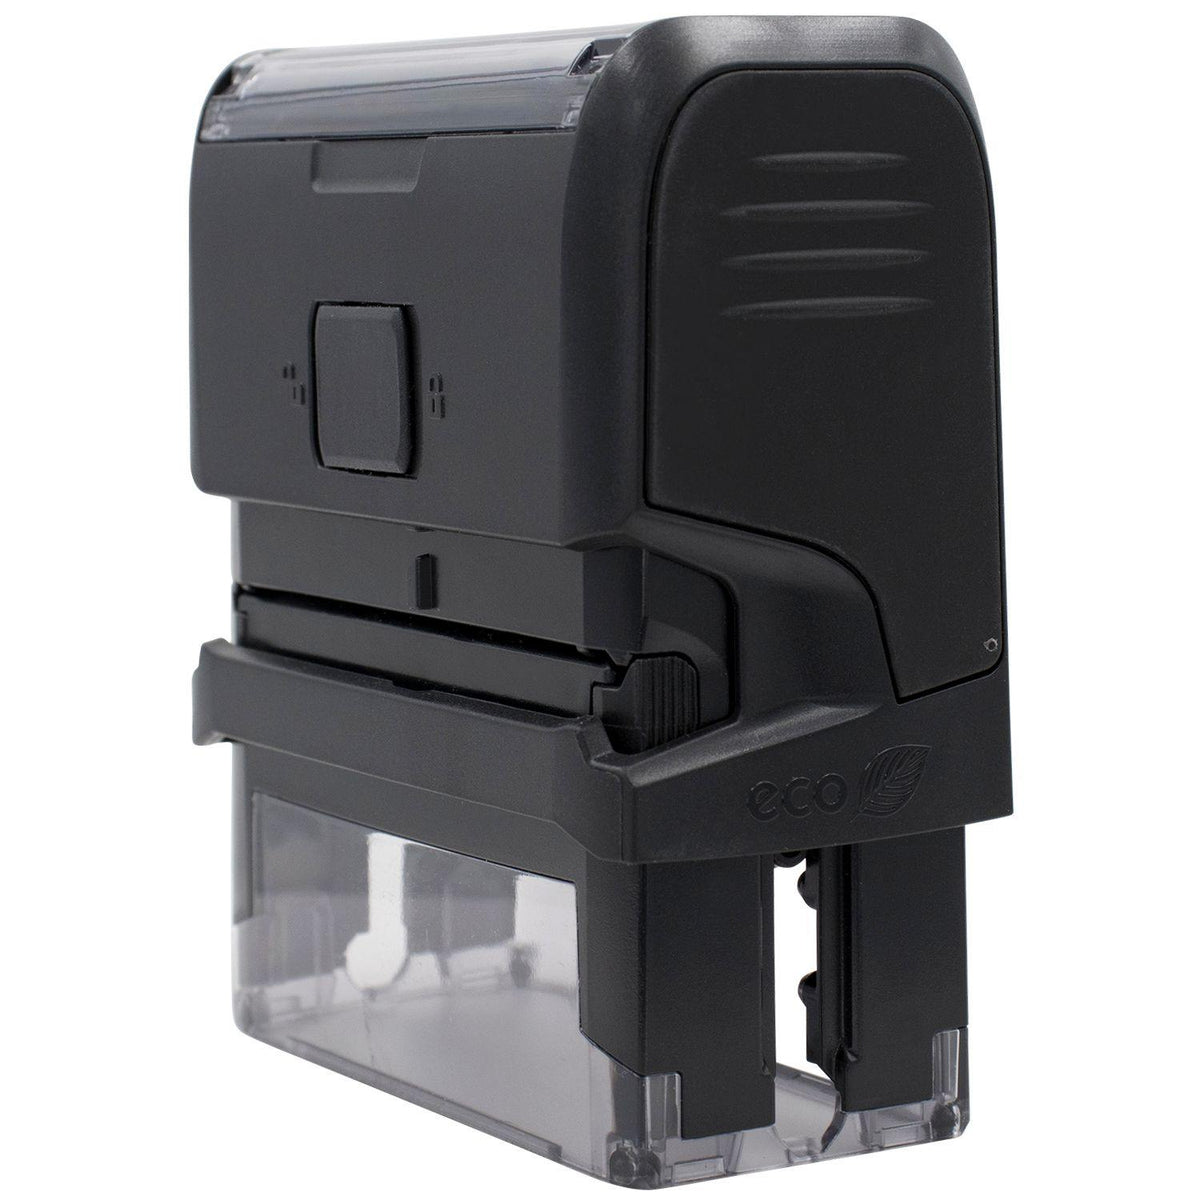 Self-Inking COD Outline Stamp - Engineer Seal Stamps - Brand_Trodat, Impression Size_Small, Stamp Type_Self-Inking Stamp, Type of Use_General, Type of Use_Office, Type of Use_Shipping &amp; Receiving